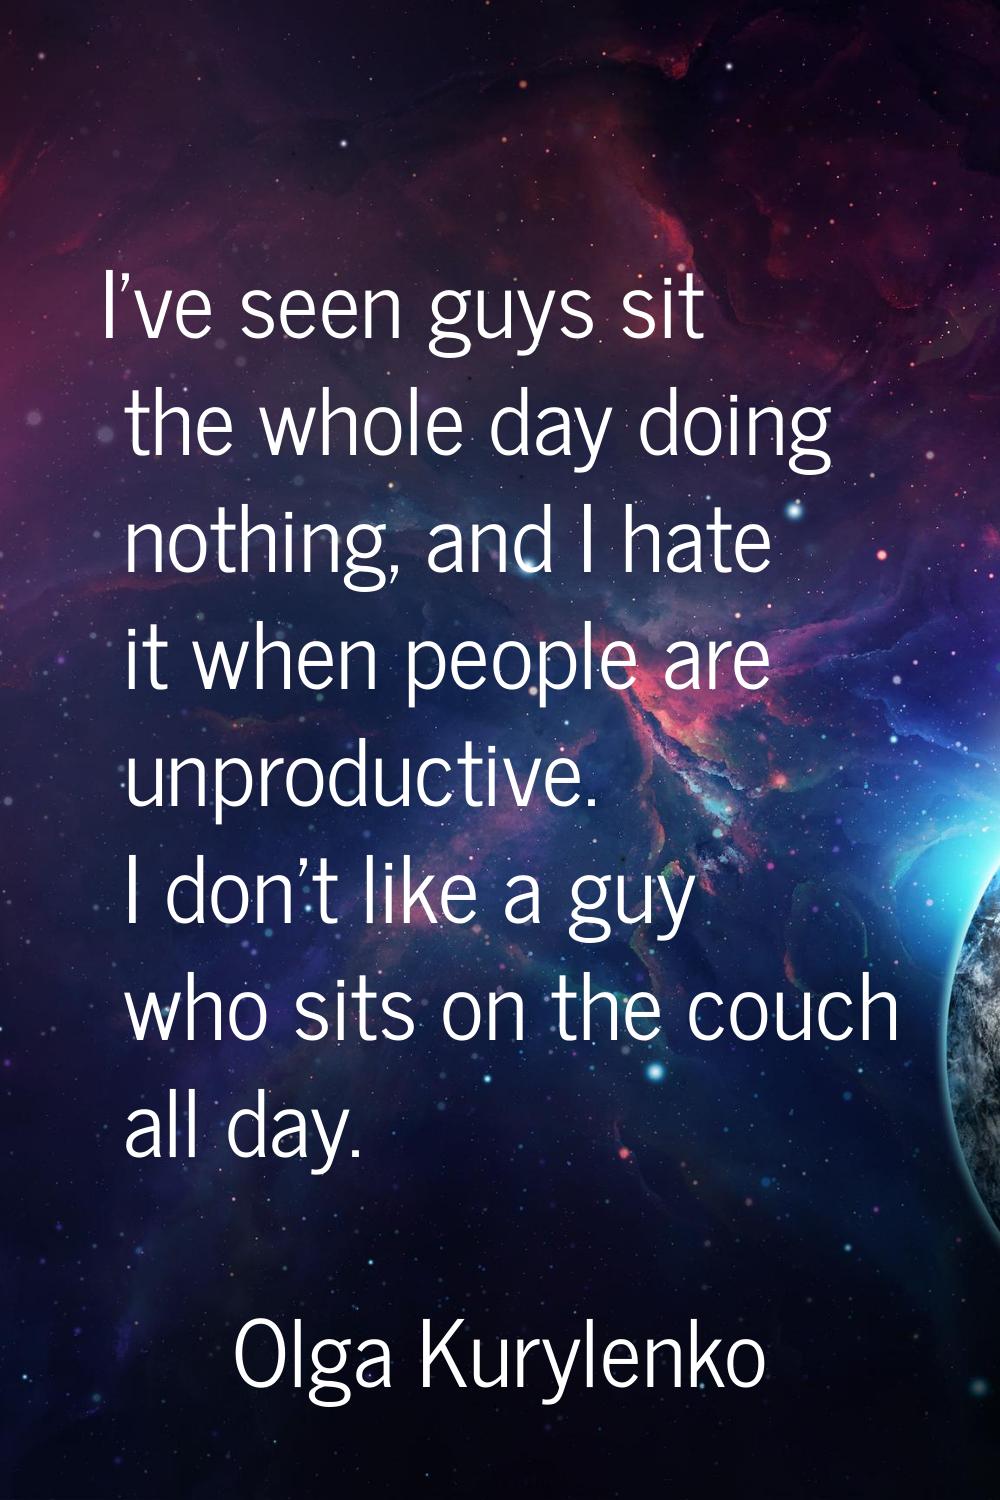 I've seen guys sit the whole day doing nothing, and I hate it when people are unproductive. I don't